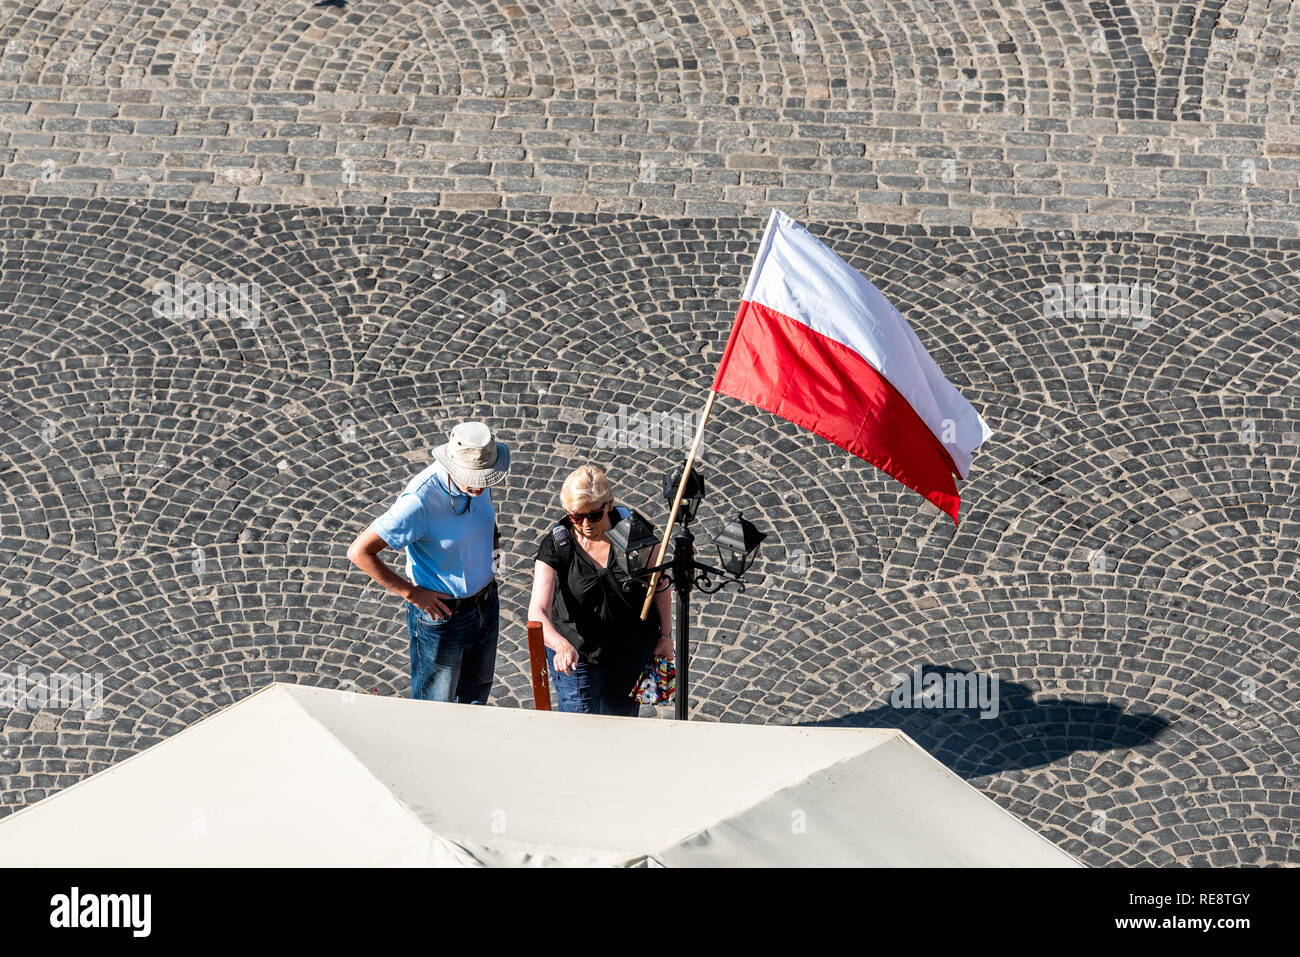 Warsaw, Poland - August 22, 2018: Old town market square with historic cobblestone street during sunny summer day high angle view of red Polish flag a Stock Photo